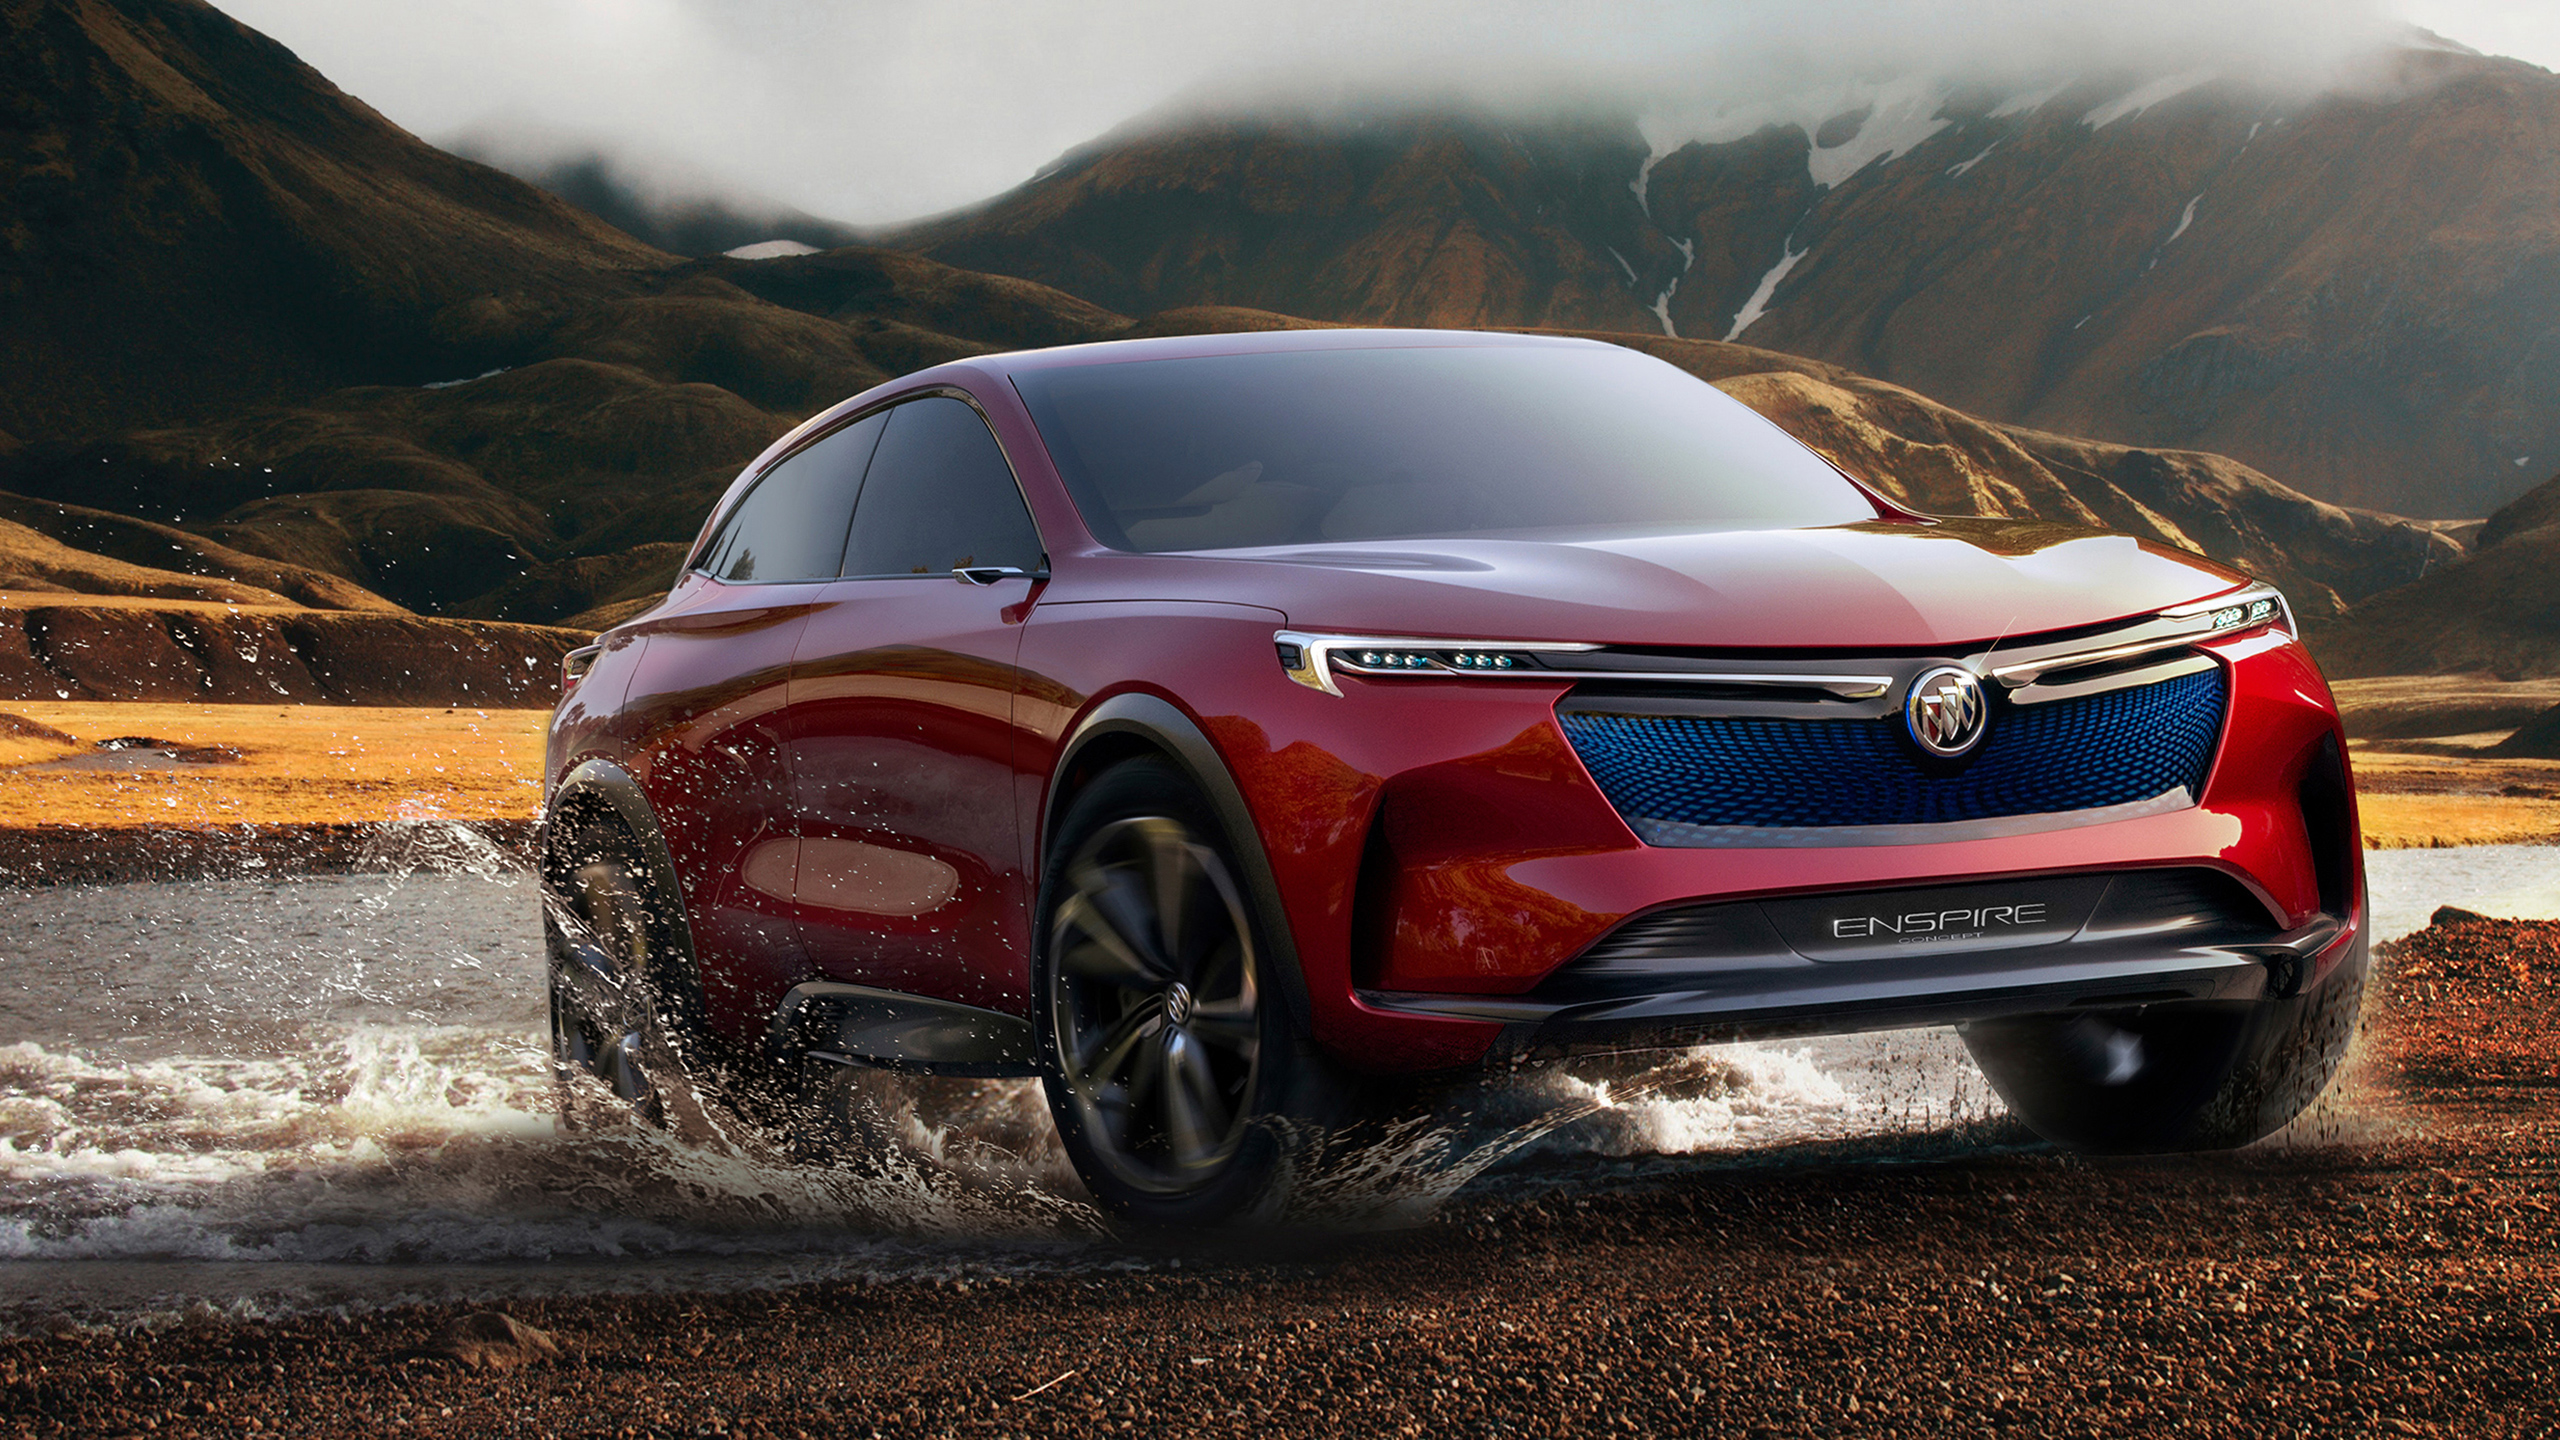 2018 Buick Enspire Electric SUV Wallpapers